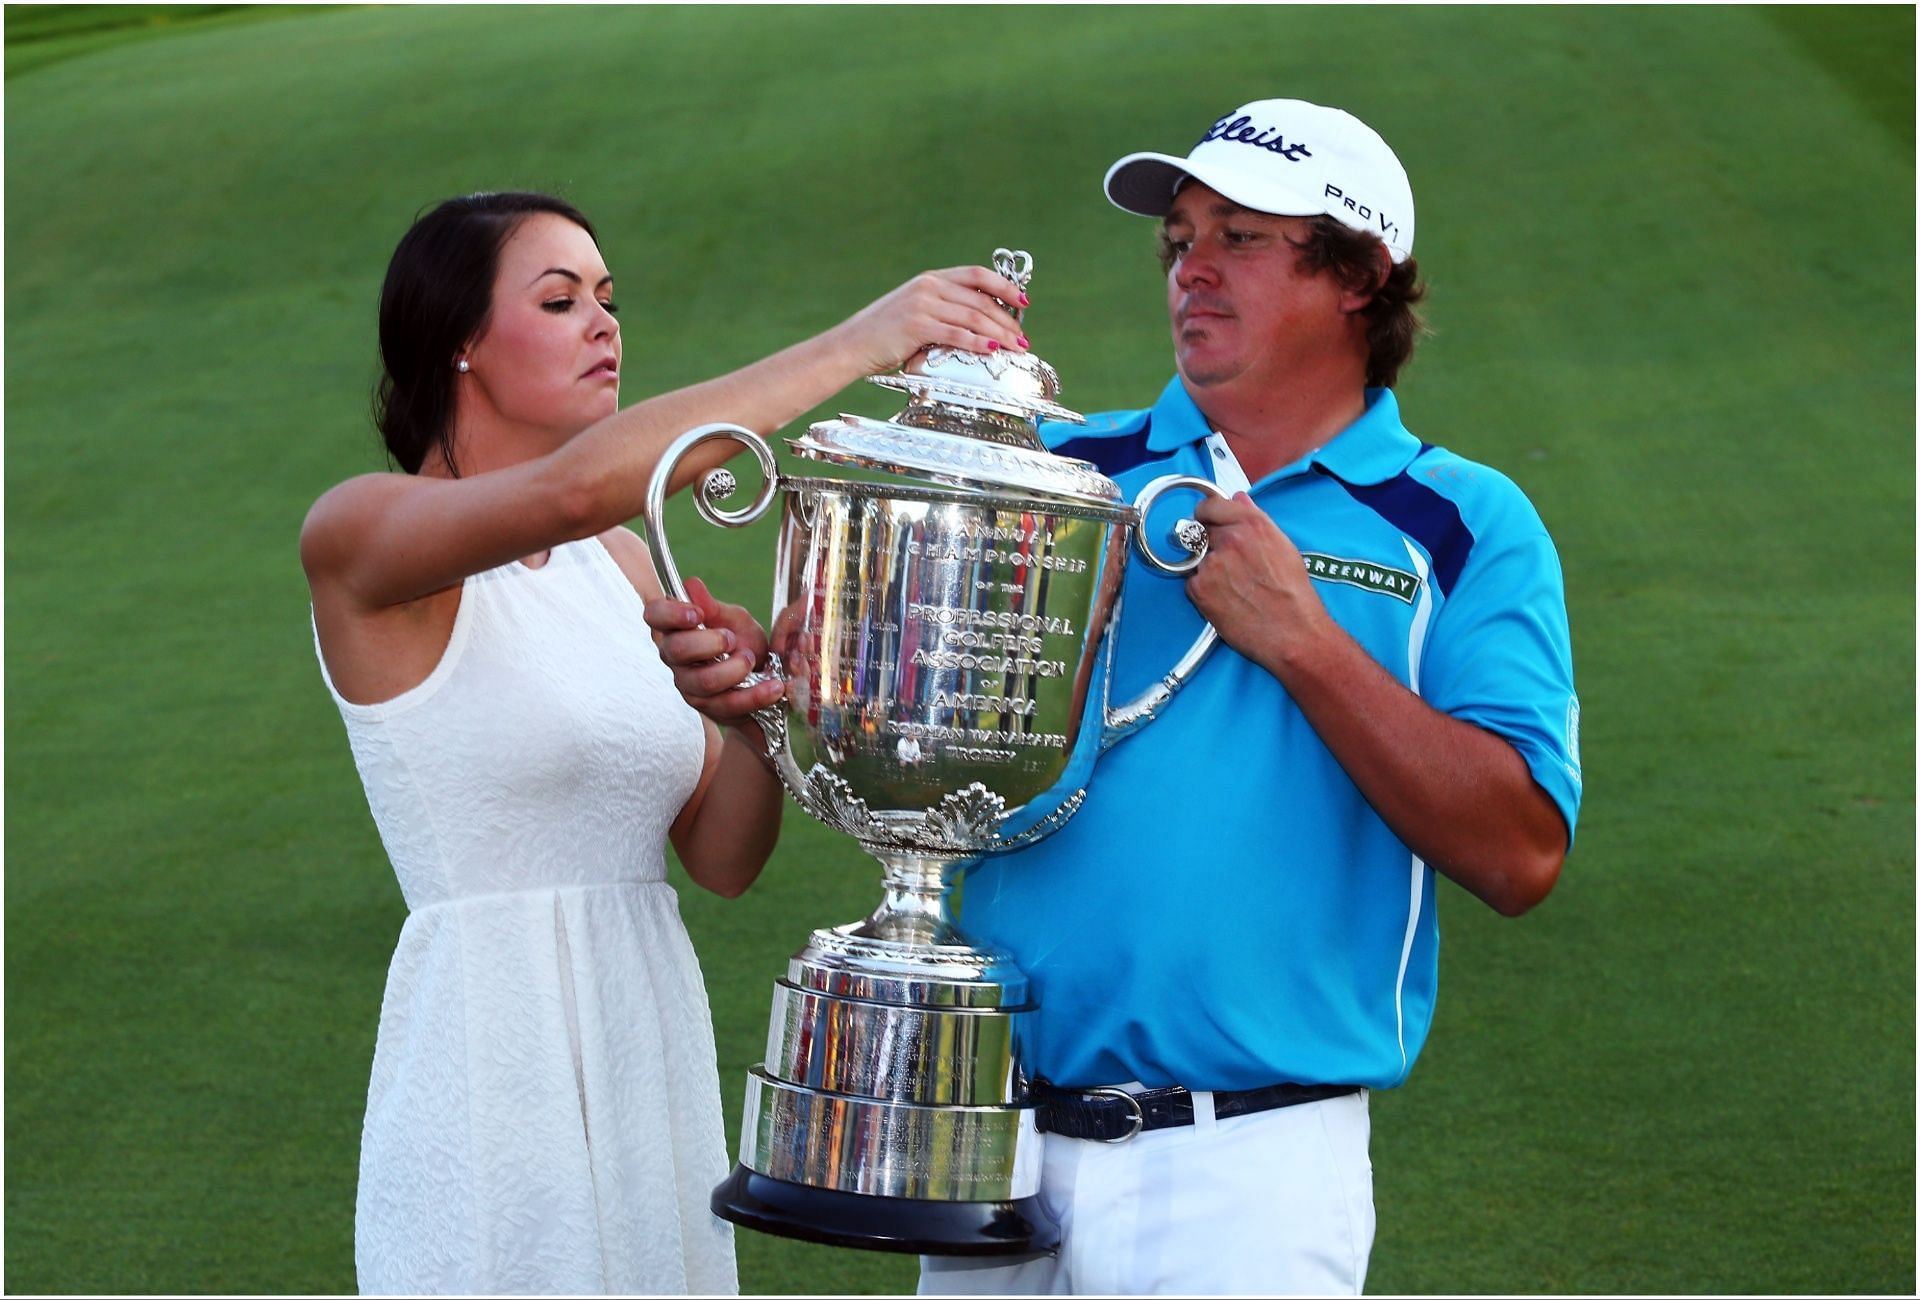 Jason Dufner and his wife Amanda Boyd at the 2013 PGA Championship (via Getty Images)